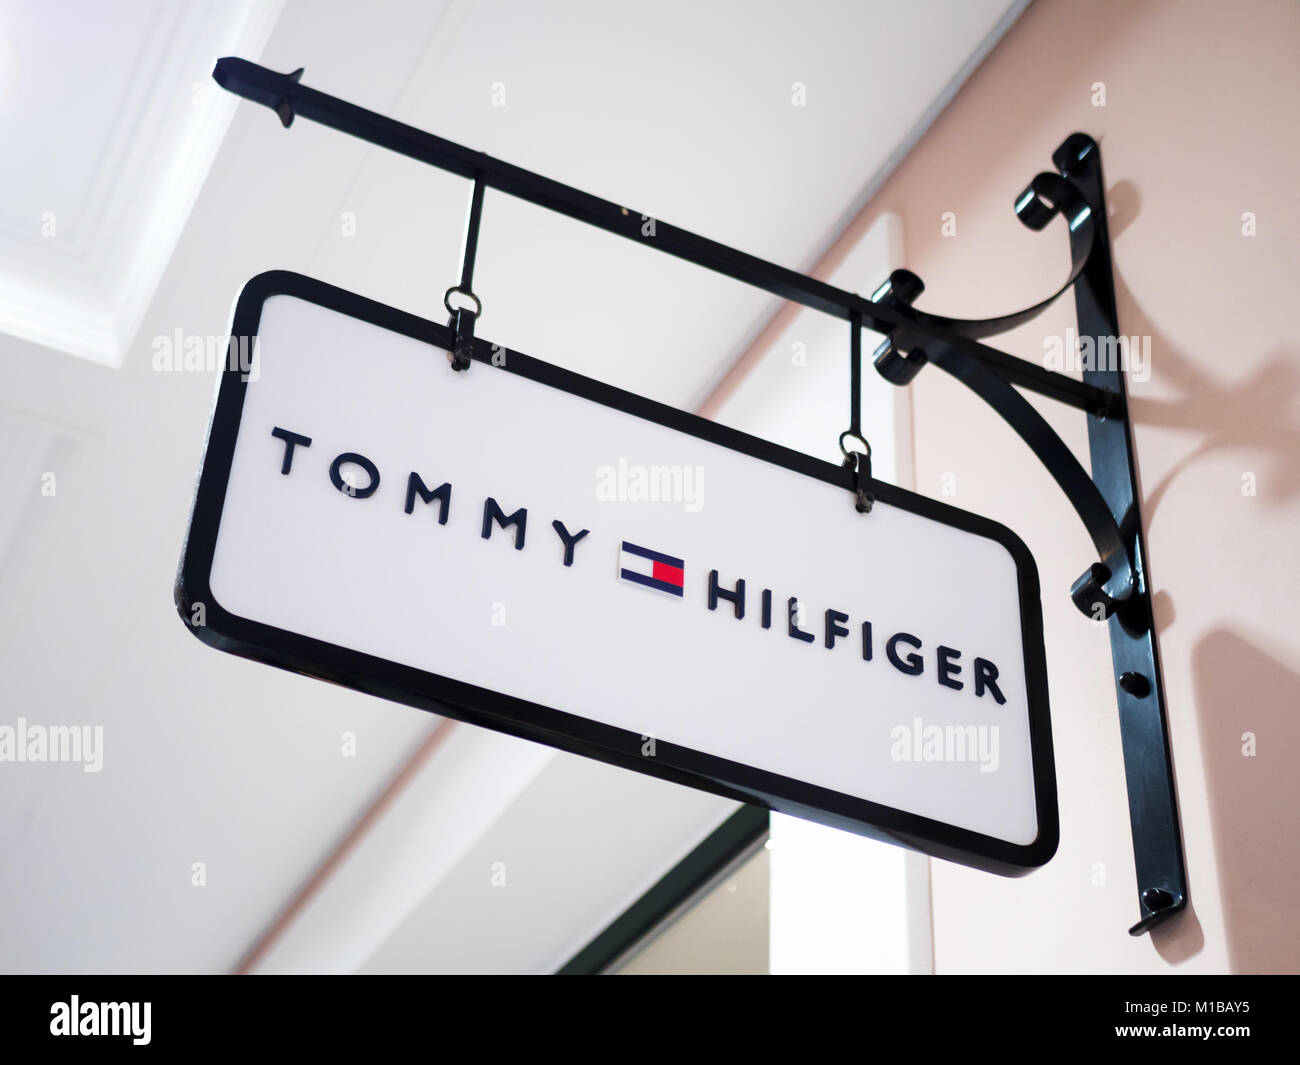 ATHENS, GREECE - DECEMBER 30, 2016: Tommy Hilfiger shop in a mall of Athens, Greece Stock Photo - Alamy